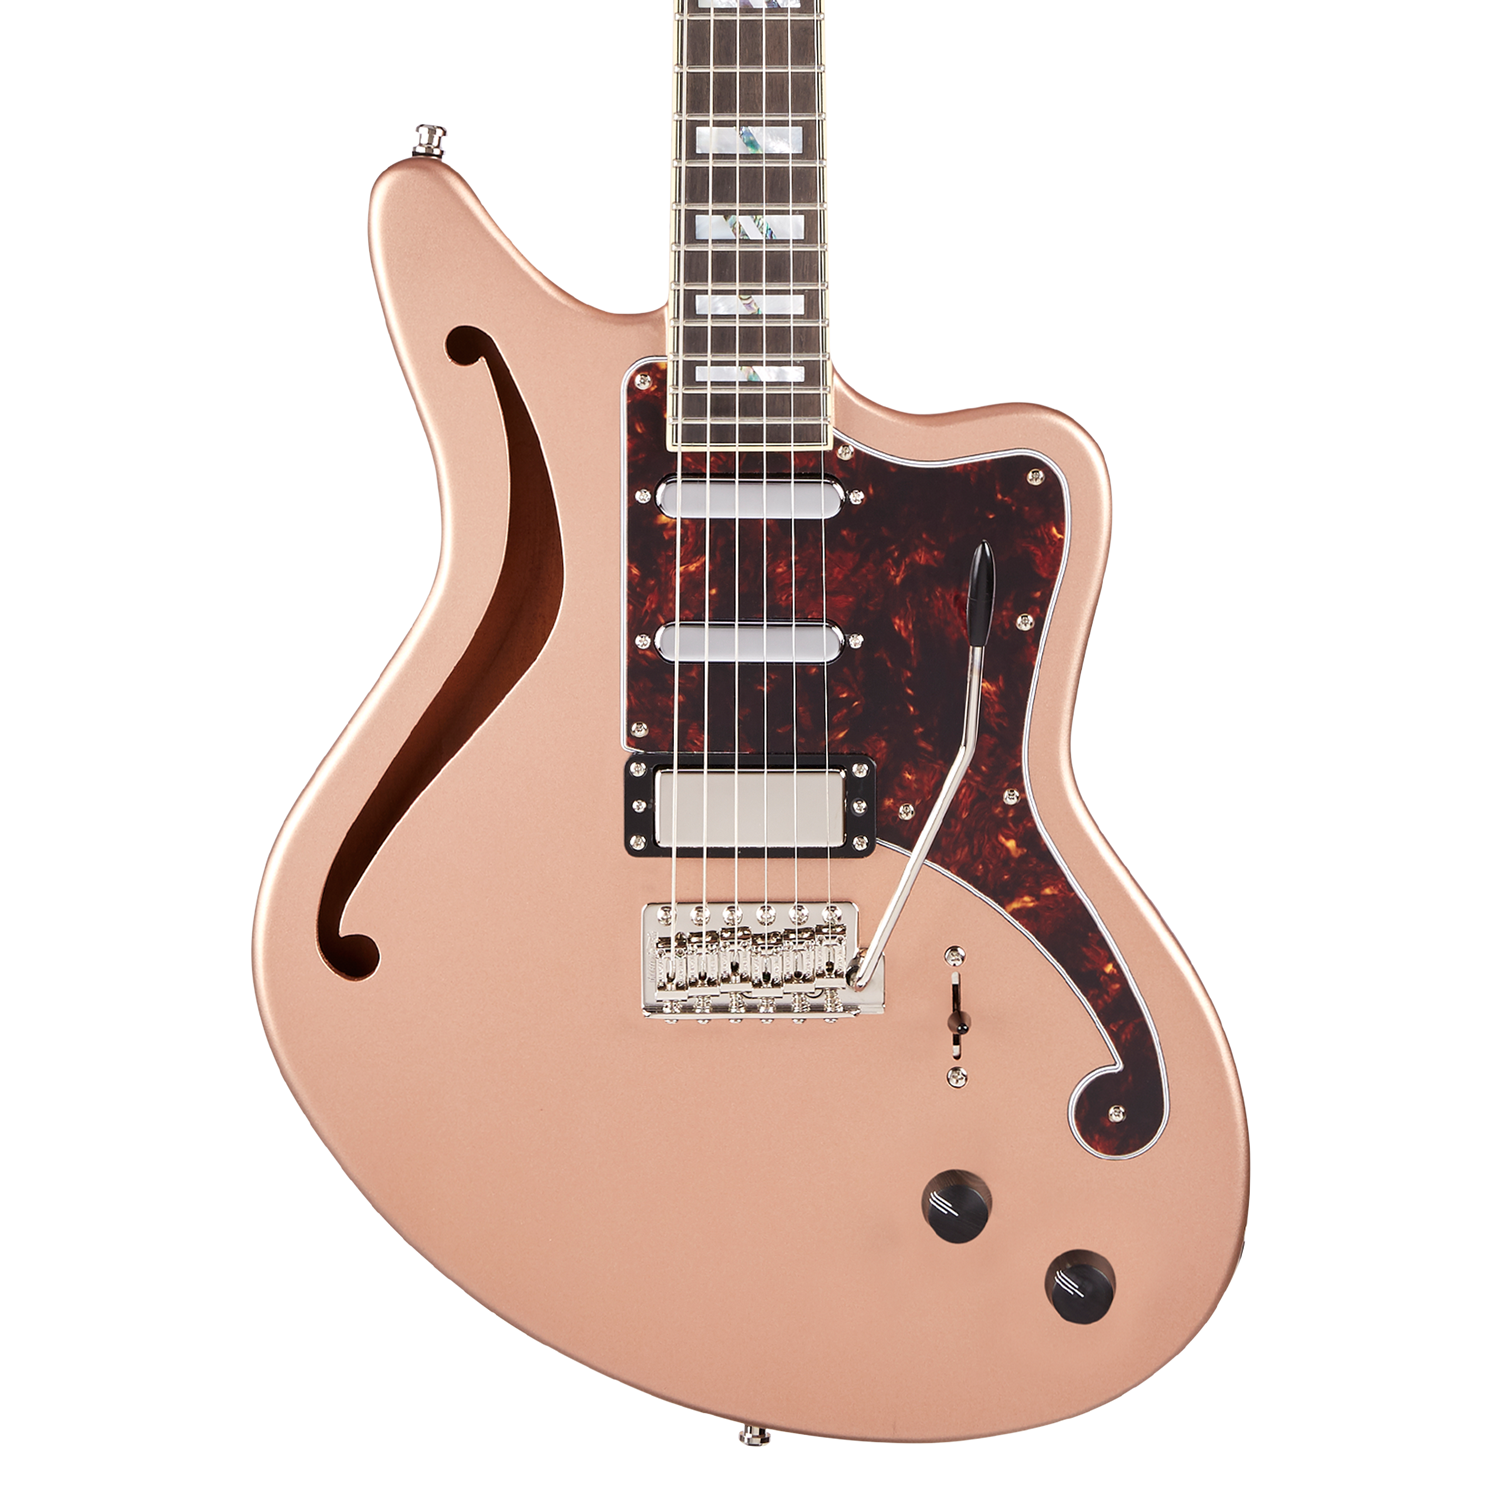 D'Angelico Deluxe Bedford SH Limited Edition - Matte Rose Gold